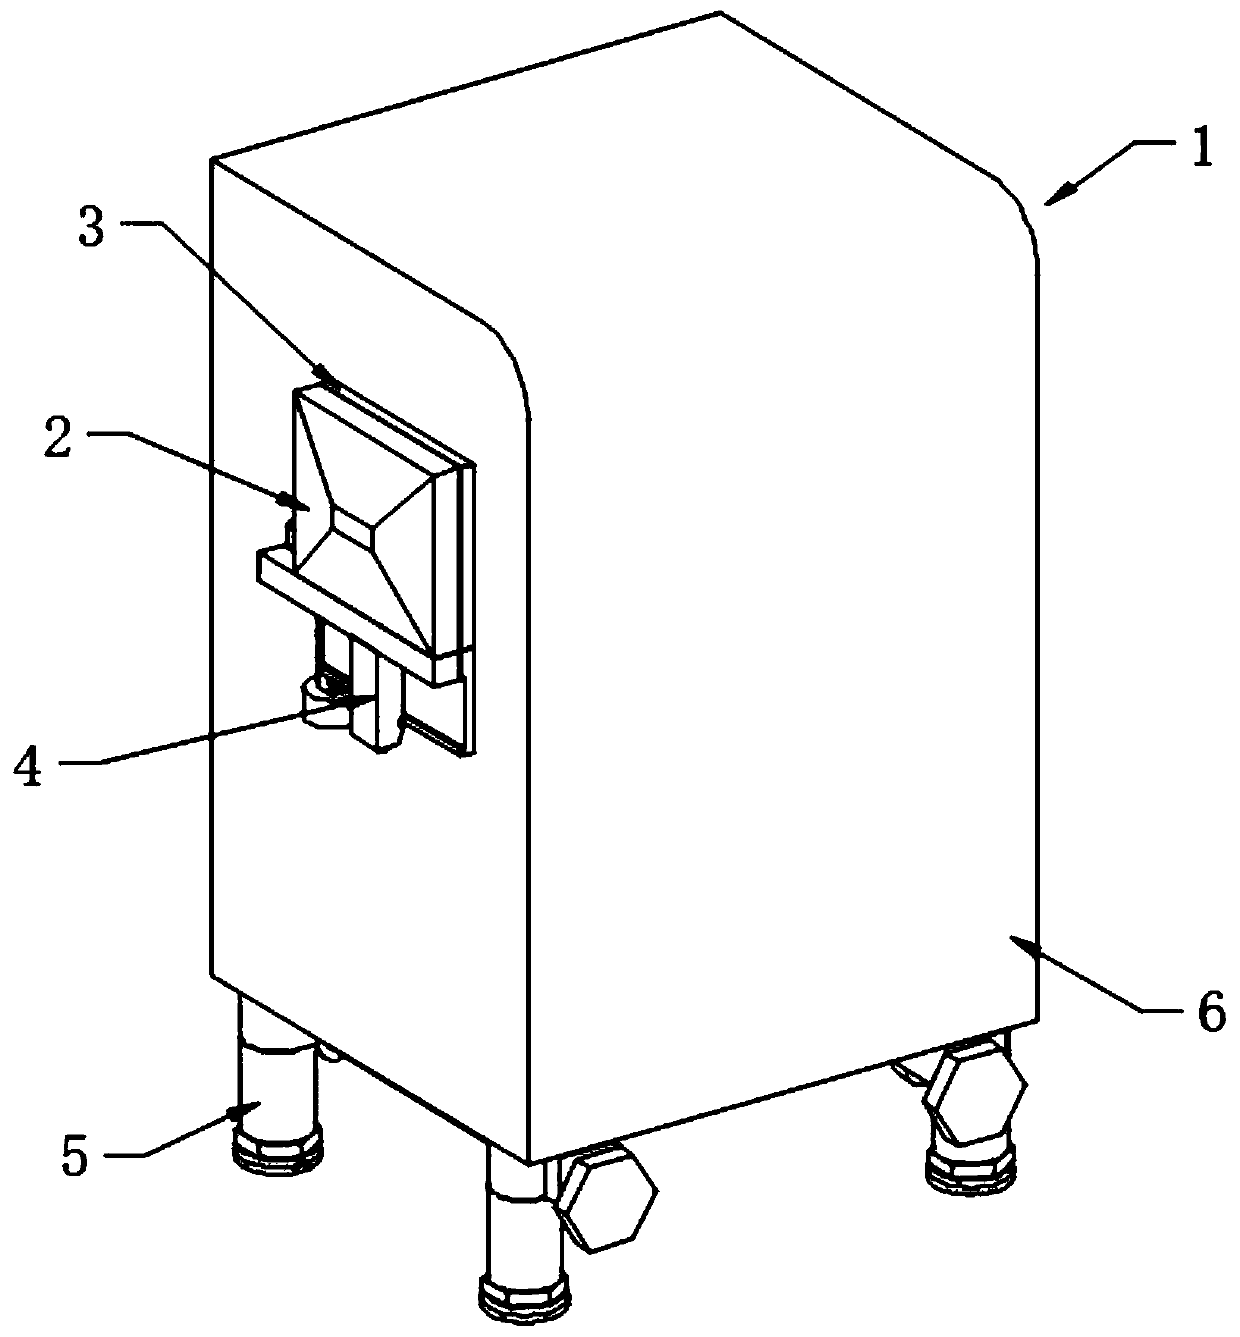 Coating mechanism for computer circuit board processing